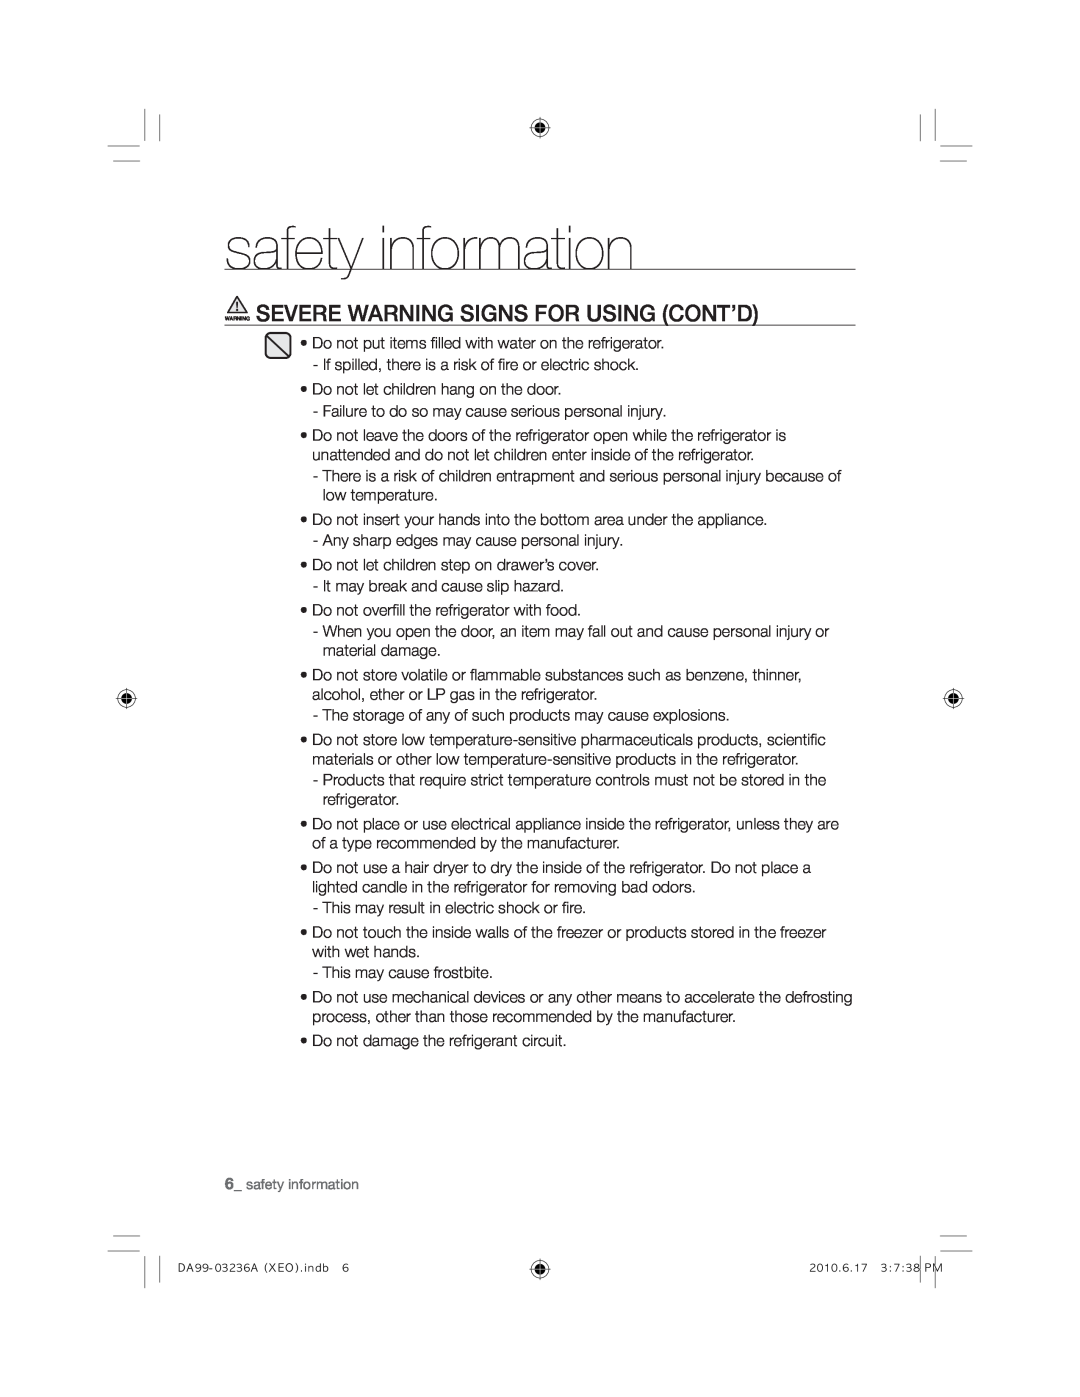 Samsung RL43TGCSW1/XEF, RL43TGCIH1/XEF, RL39TRCSW1/XEF Warning Severe Warning Signs For Using Cont’D, safety information 